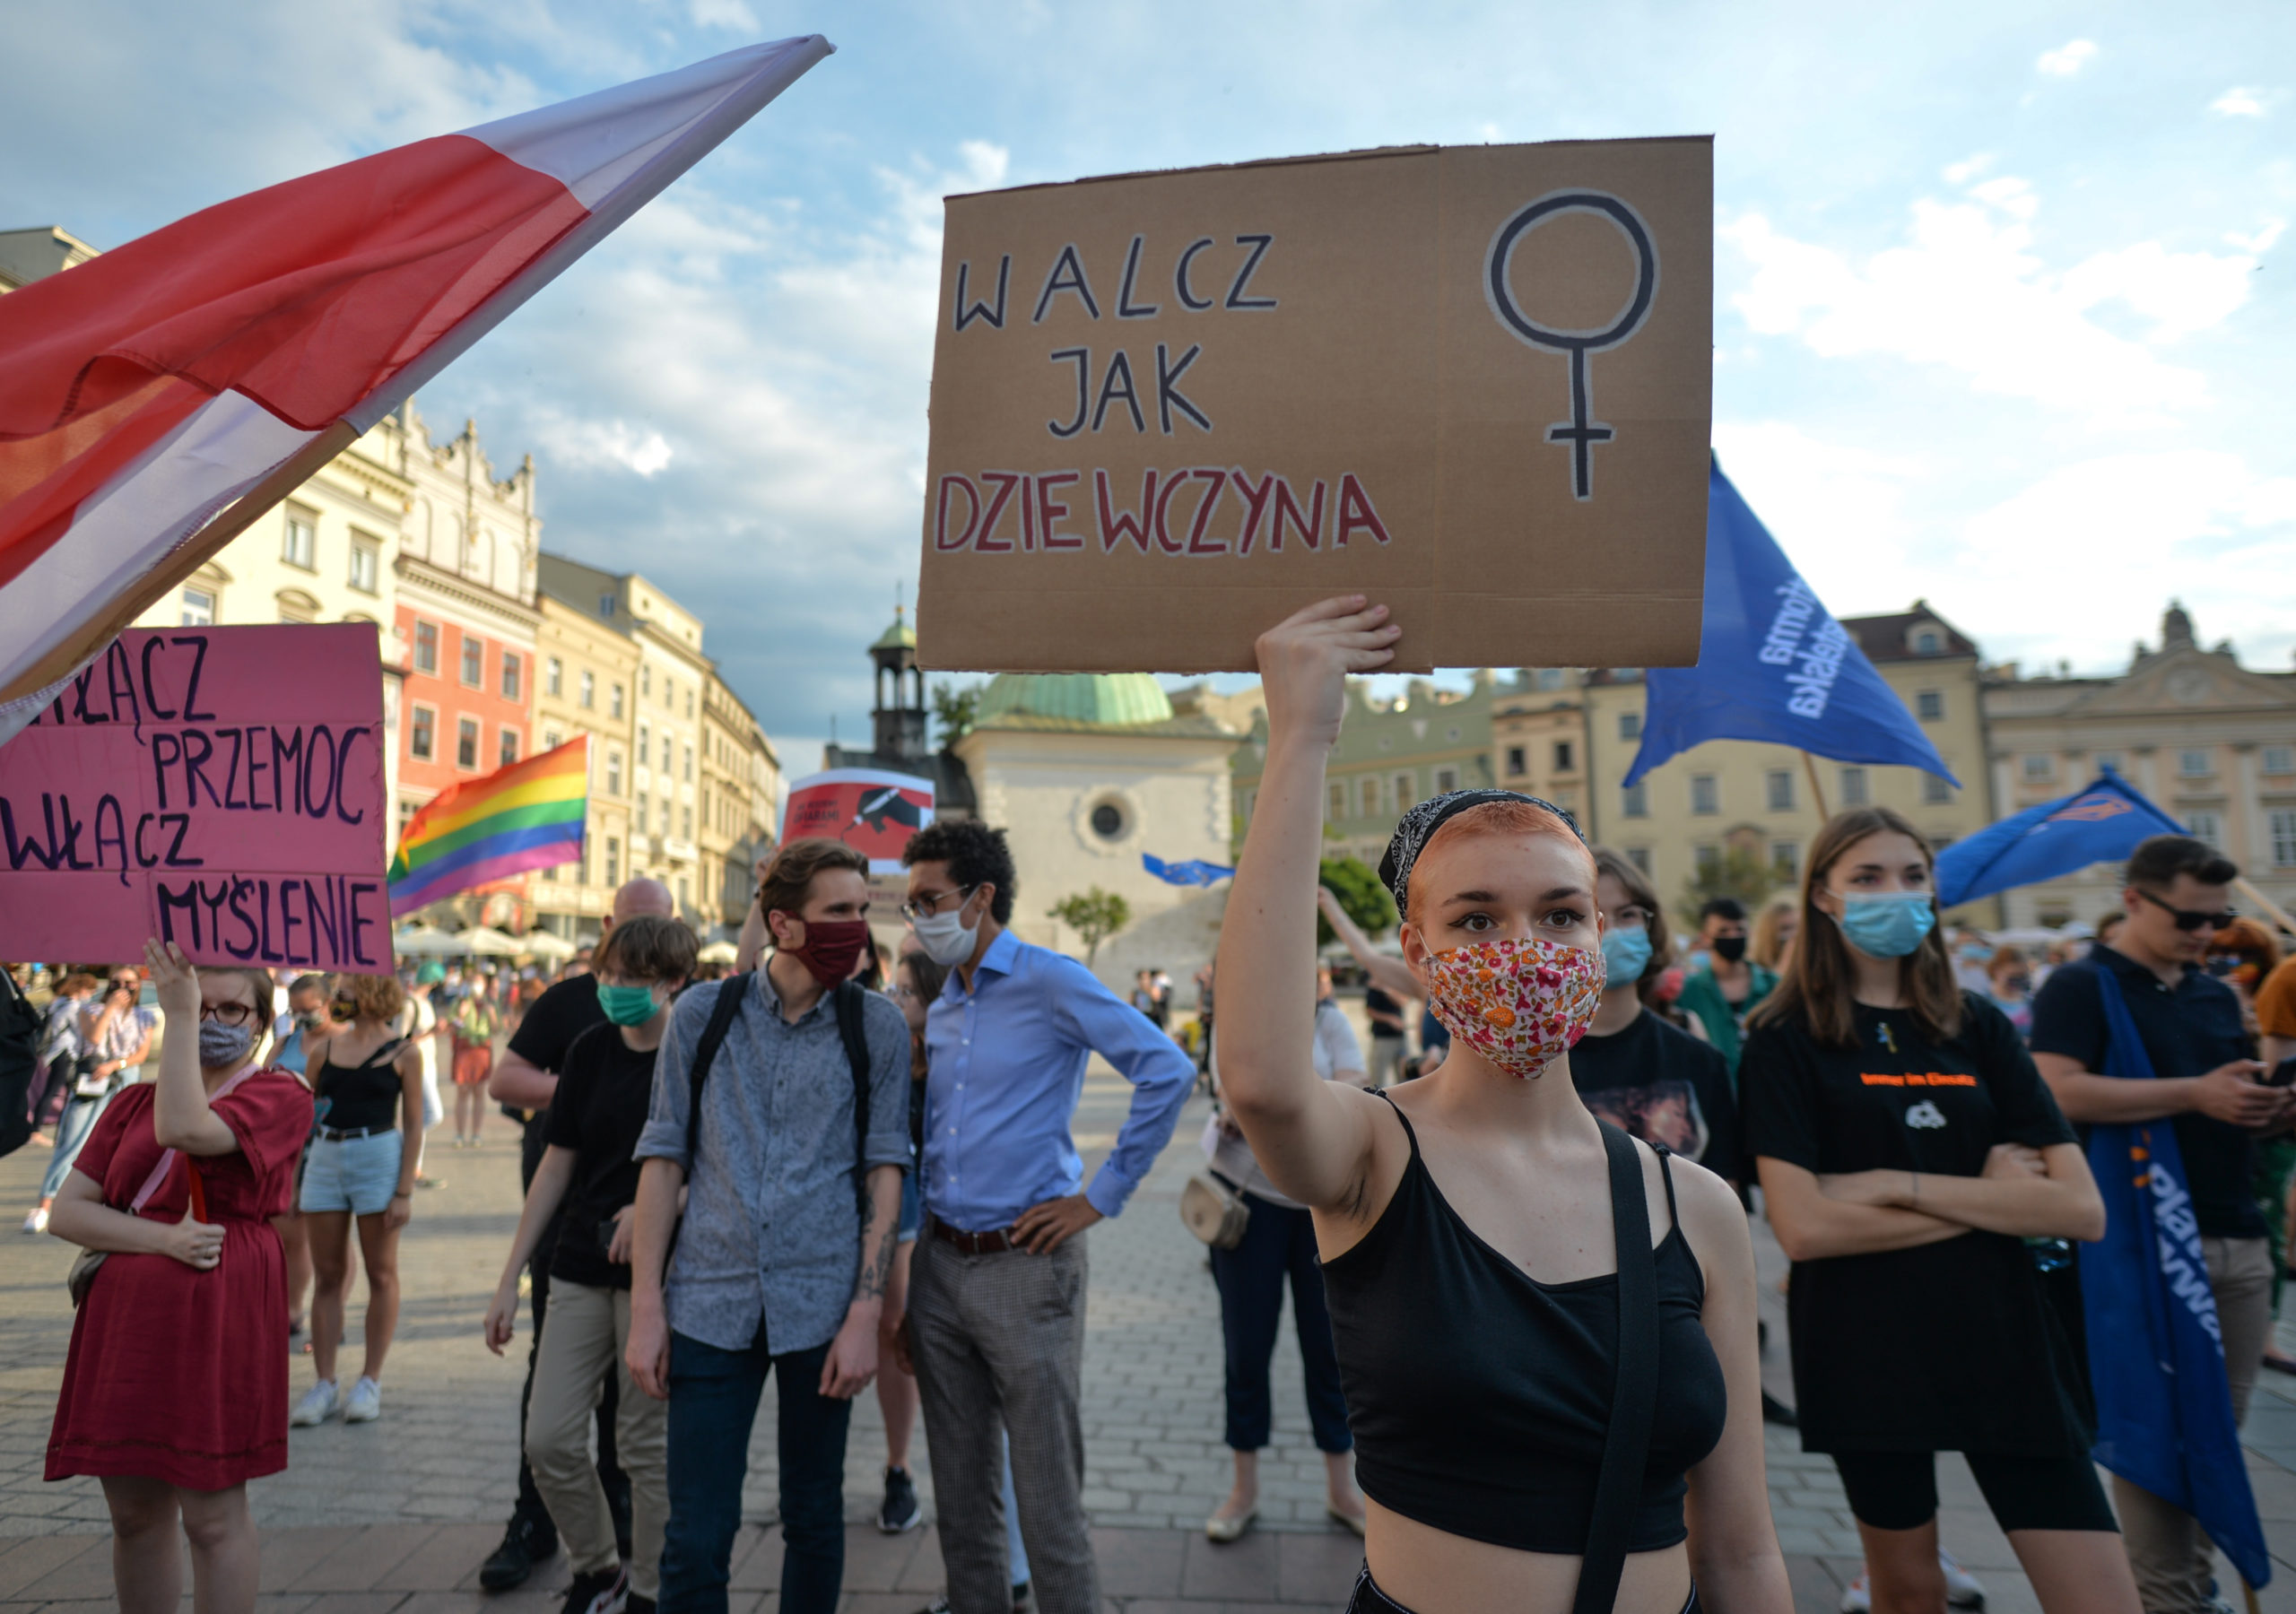 Activists gathered on Friday afternoon at Krakow's Main Market Square to voice their opposition to the government's plan to withdraw Poland from the 2011 Council of Europe's Istanbul Convention on combating domestic violence. 